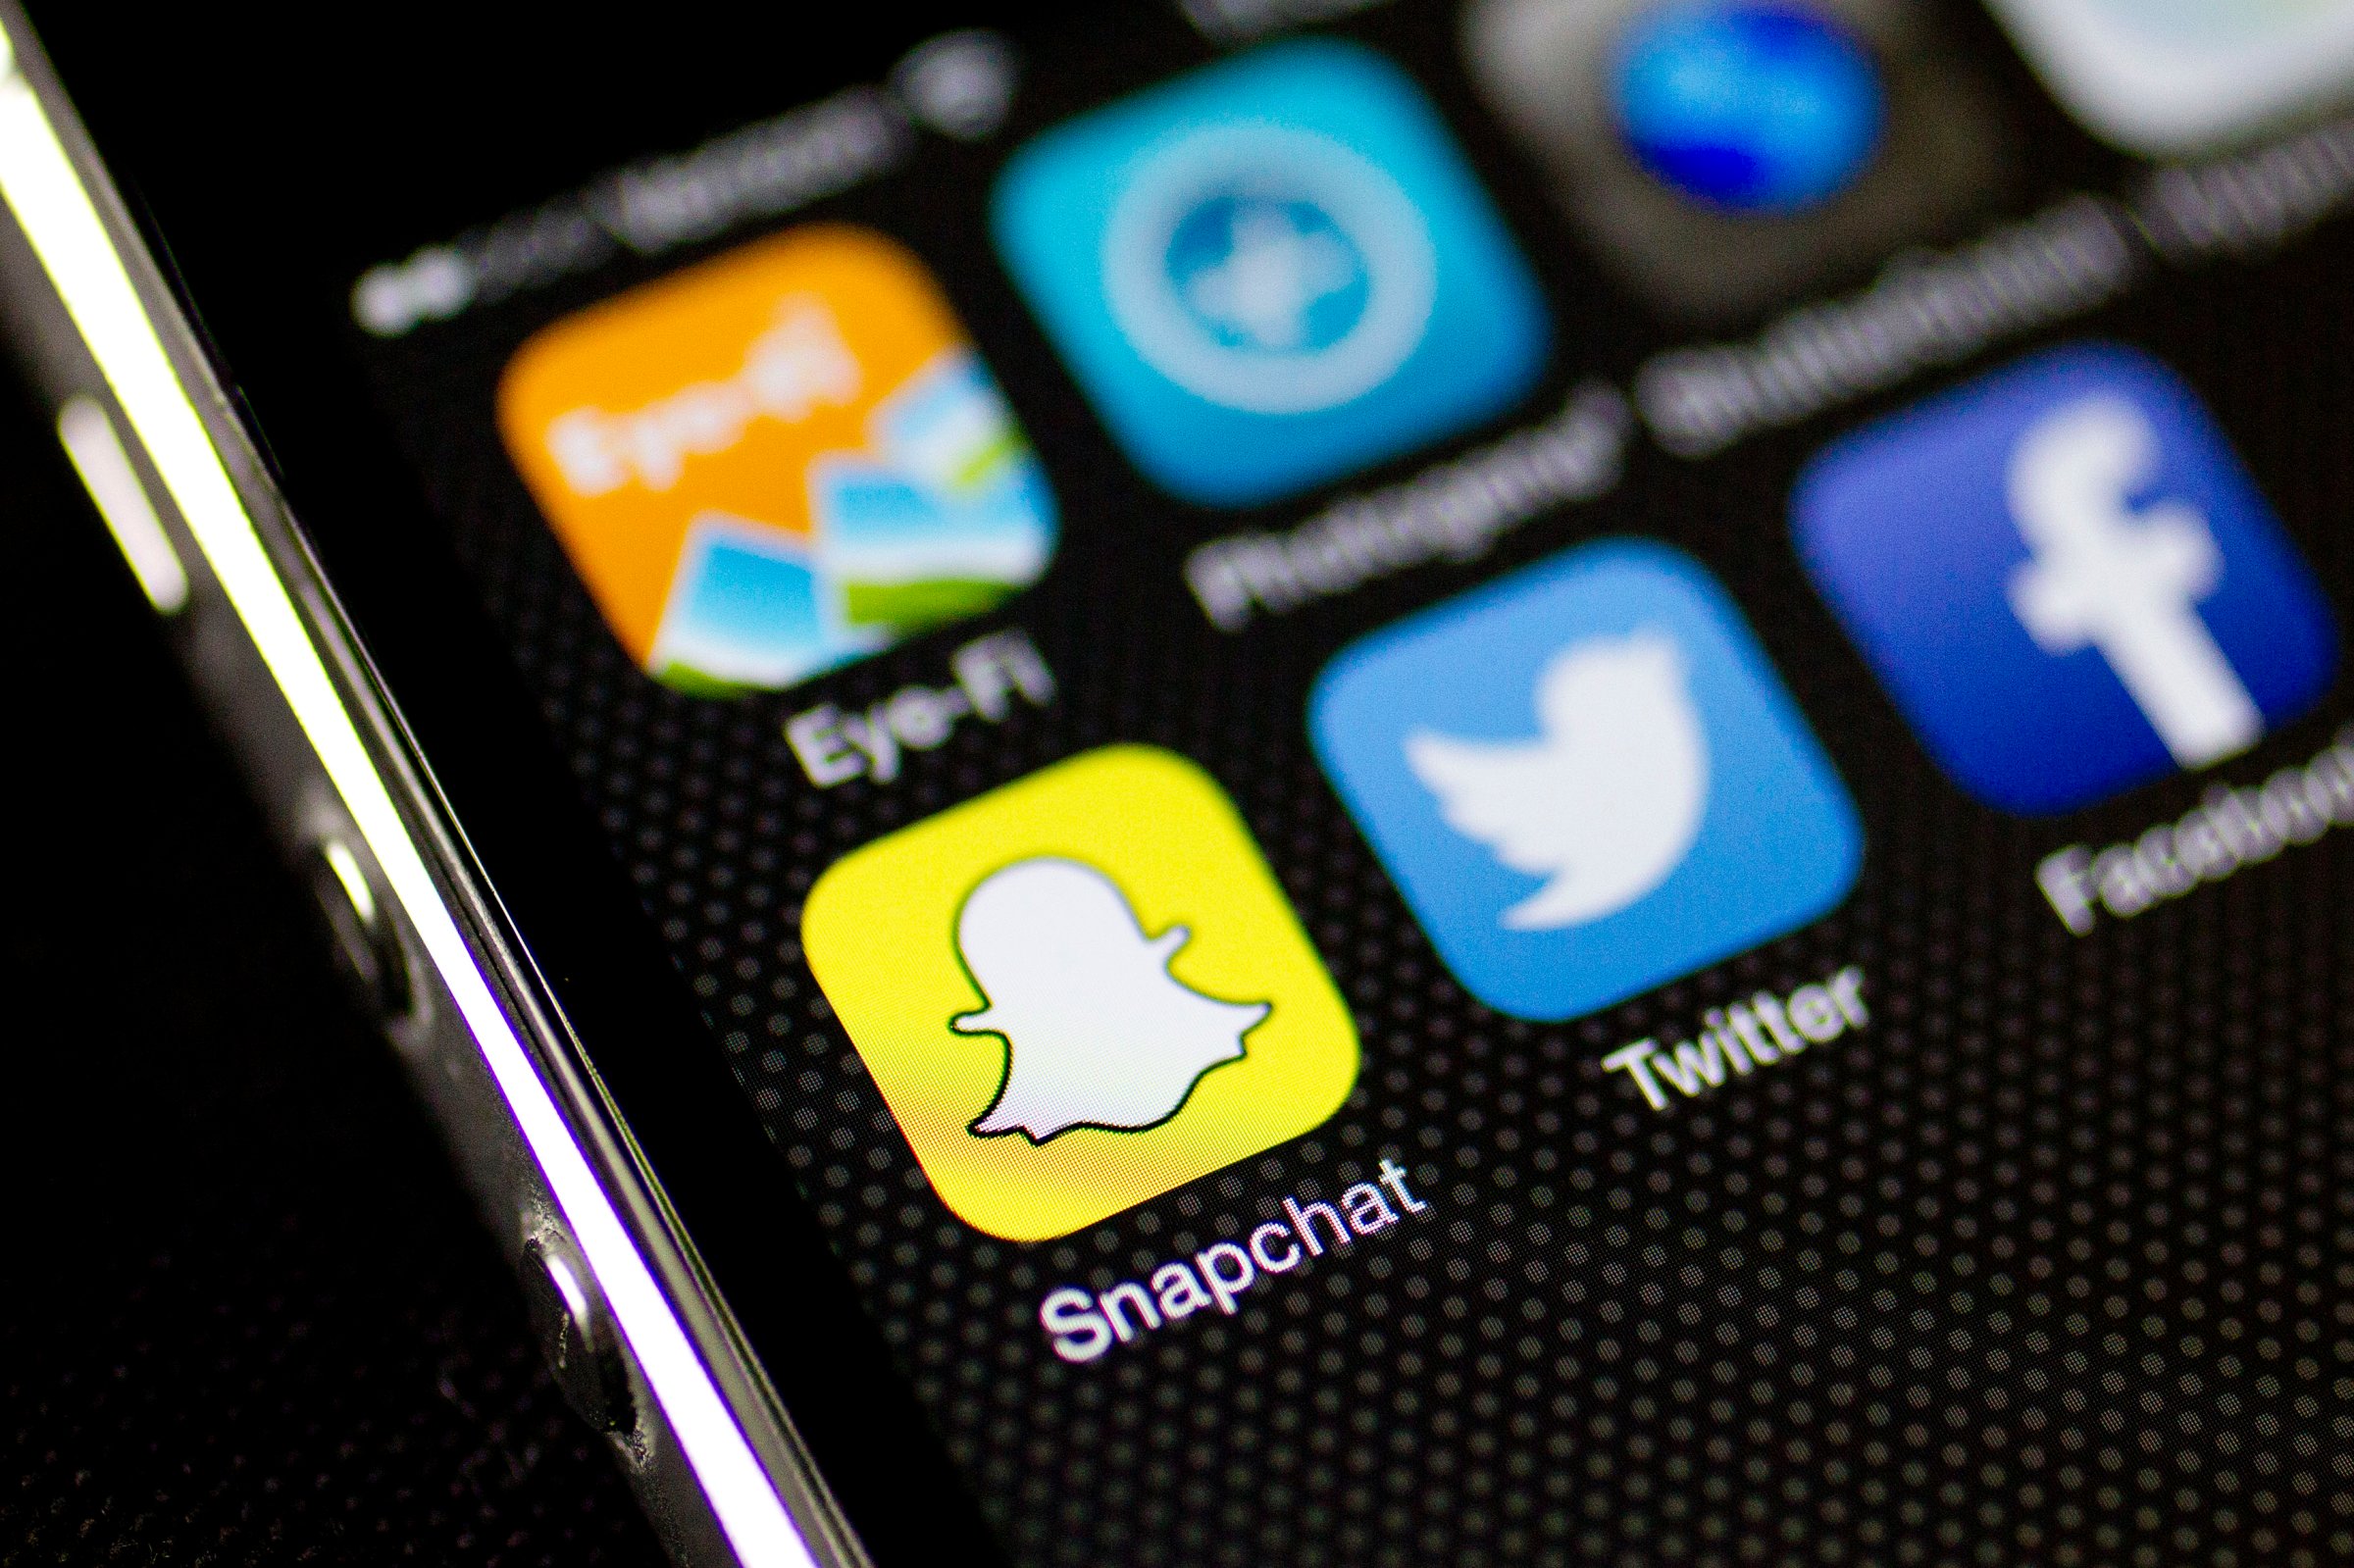 Snapchat has secured $1.8 billion in funding.